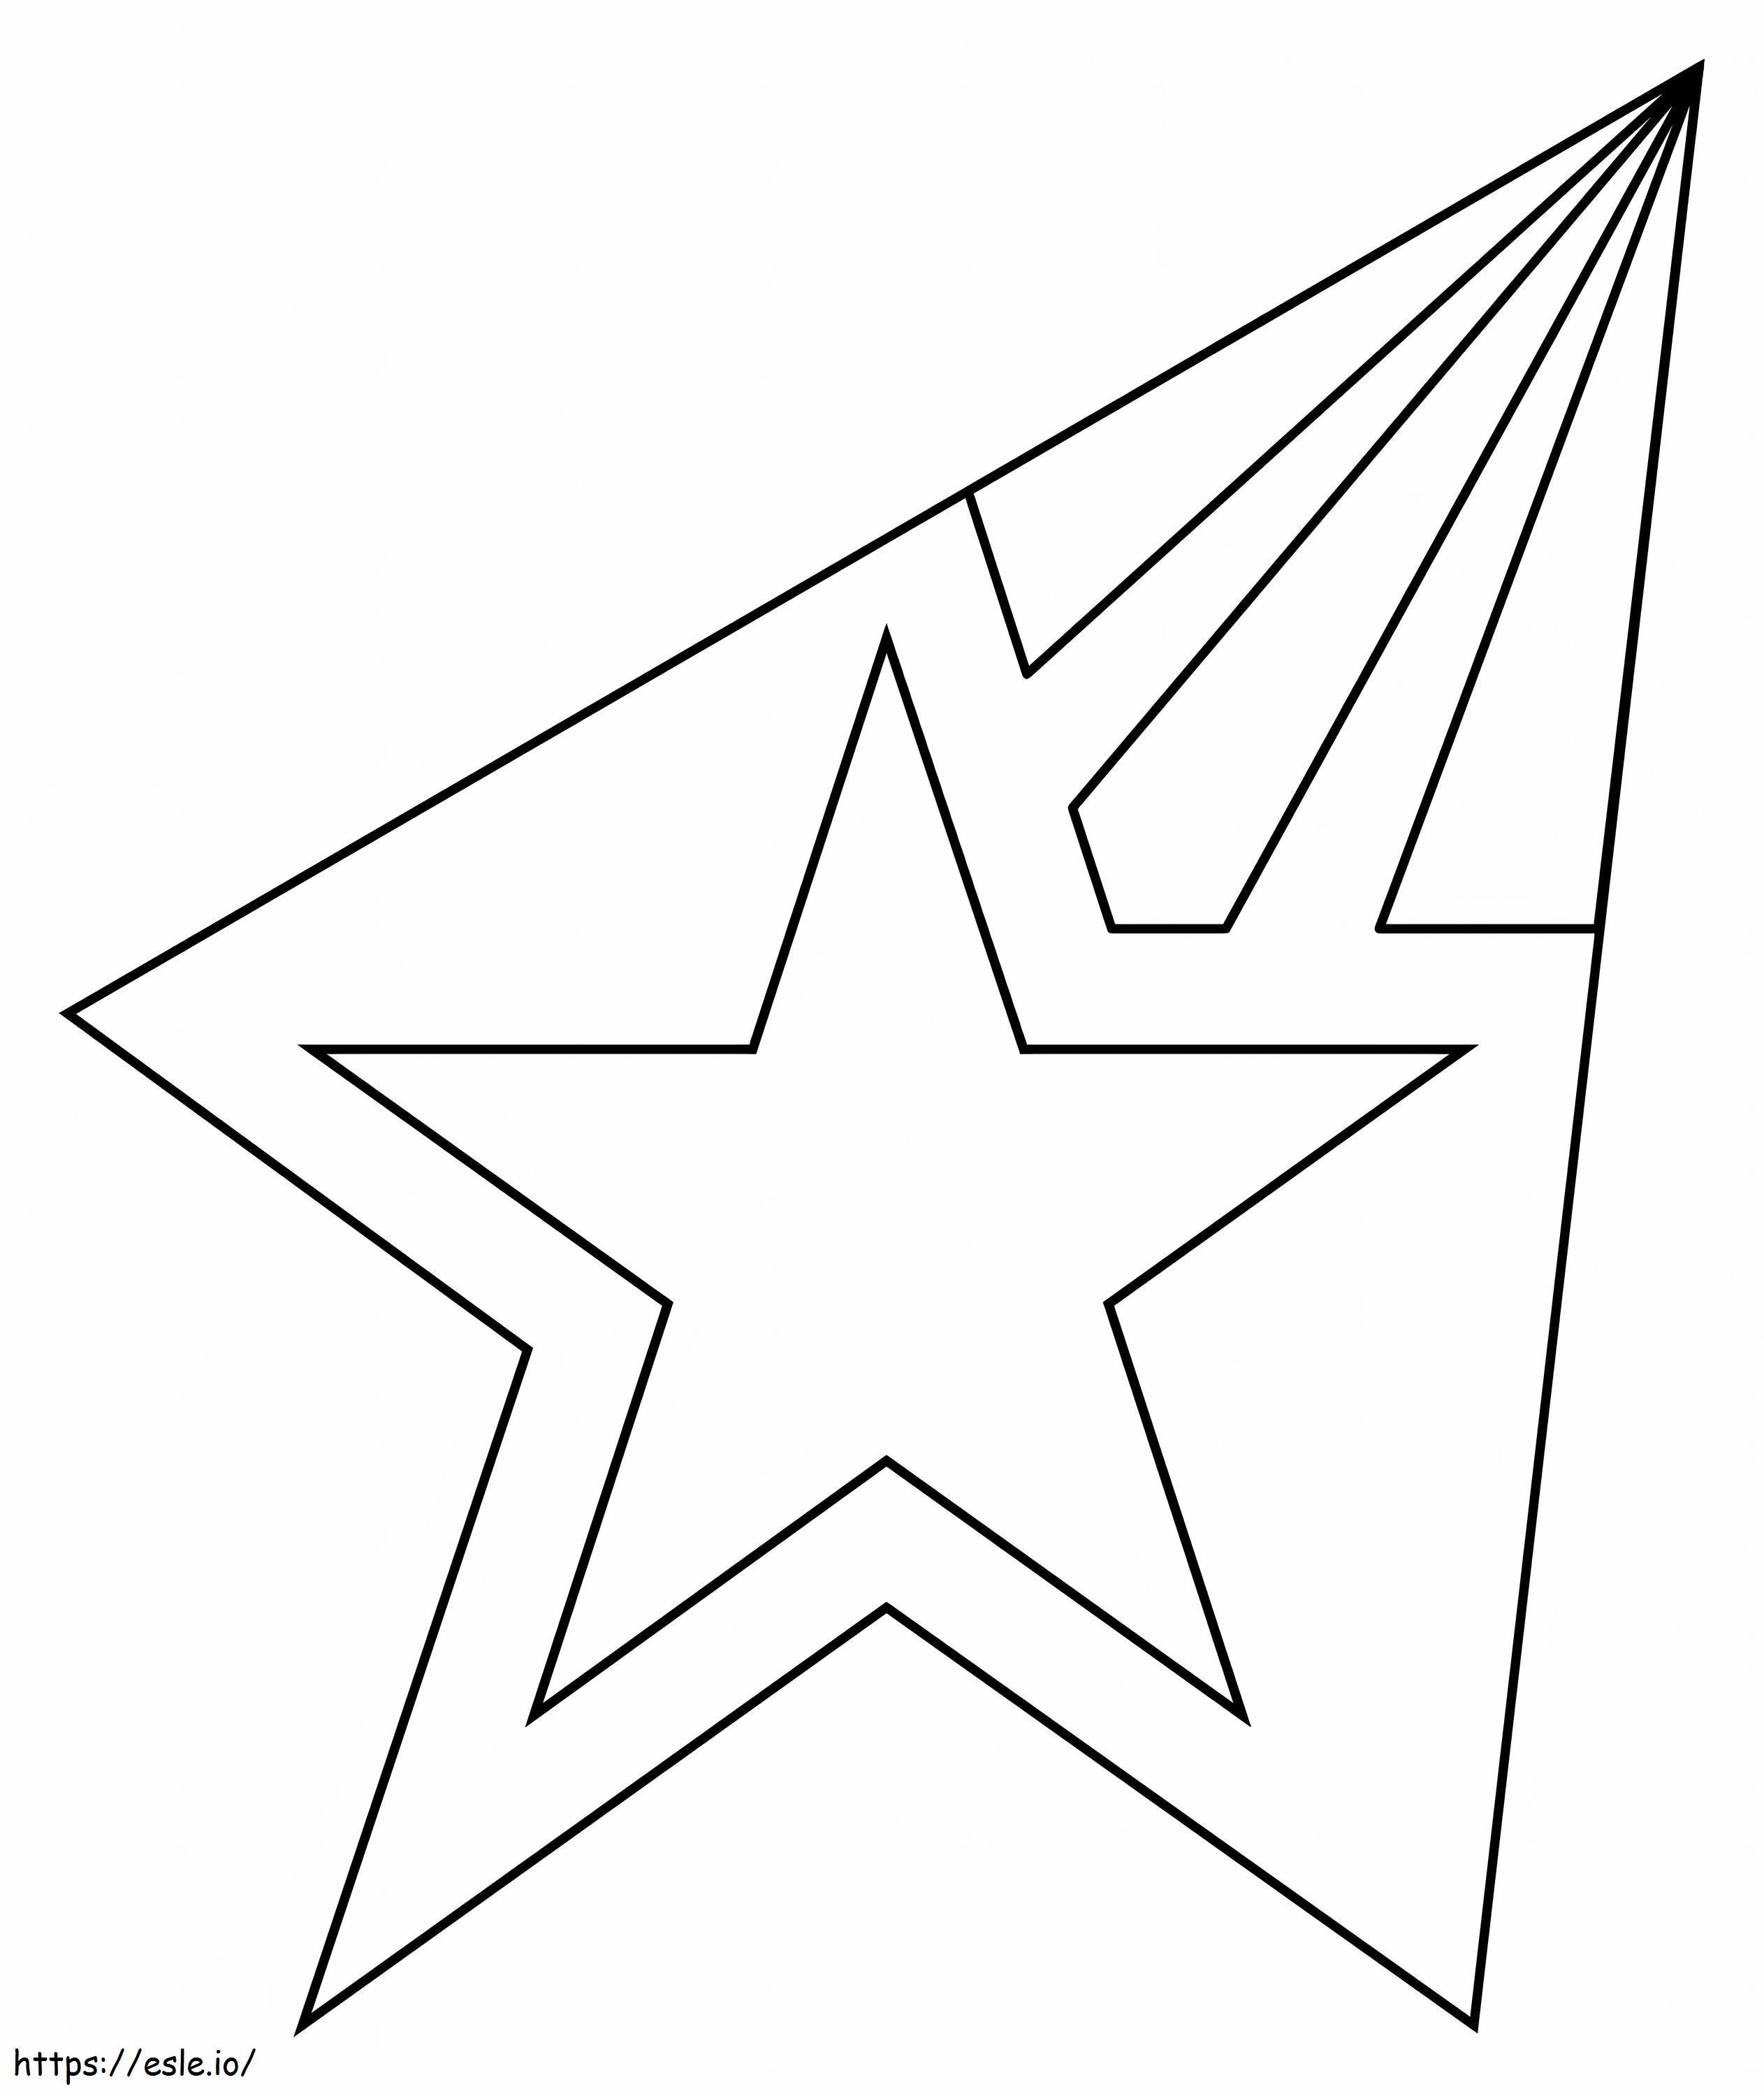 Basic Shooting Star coloring page